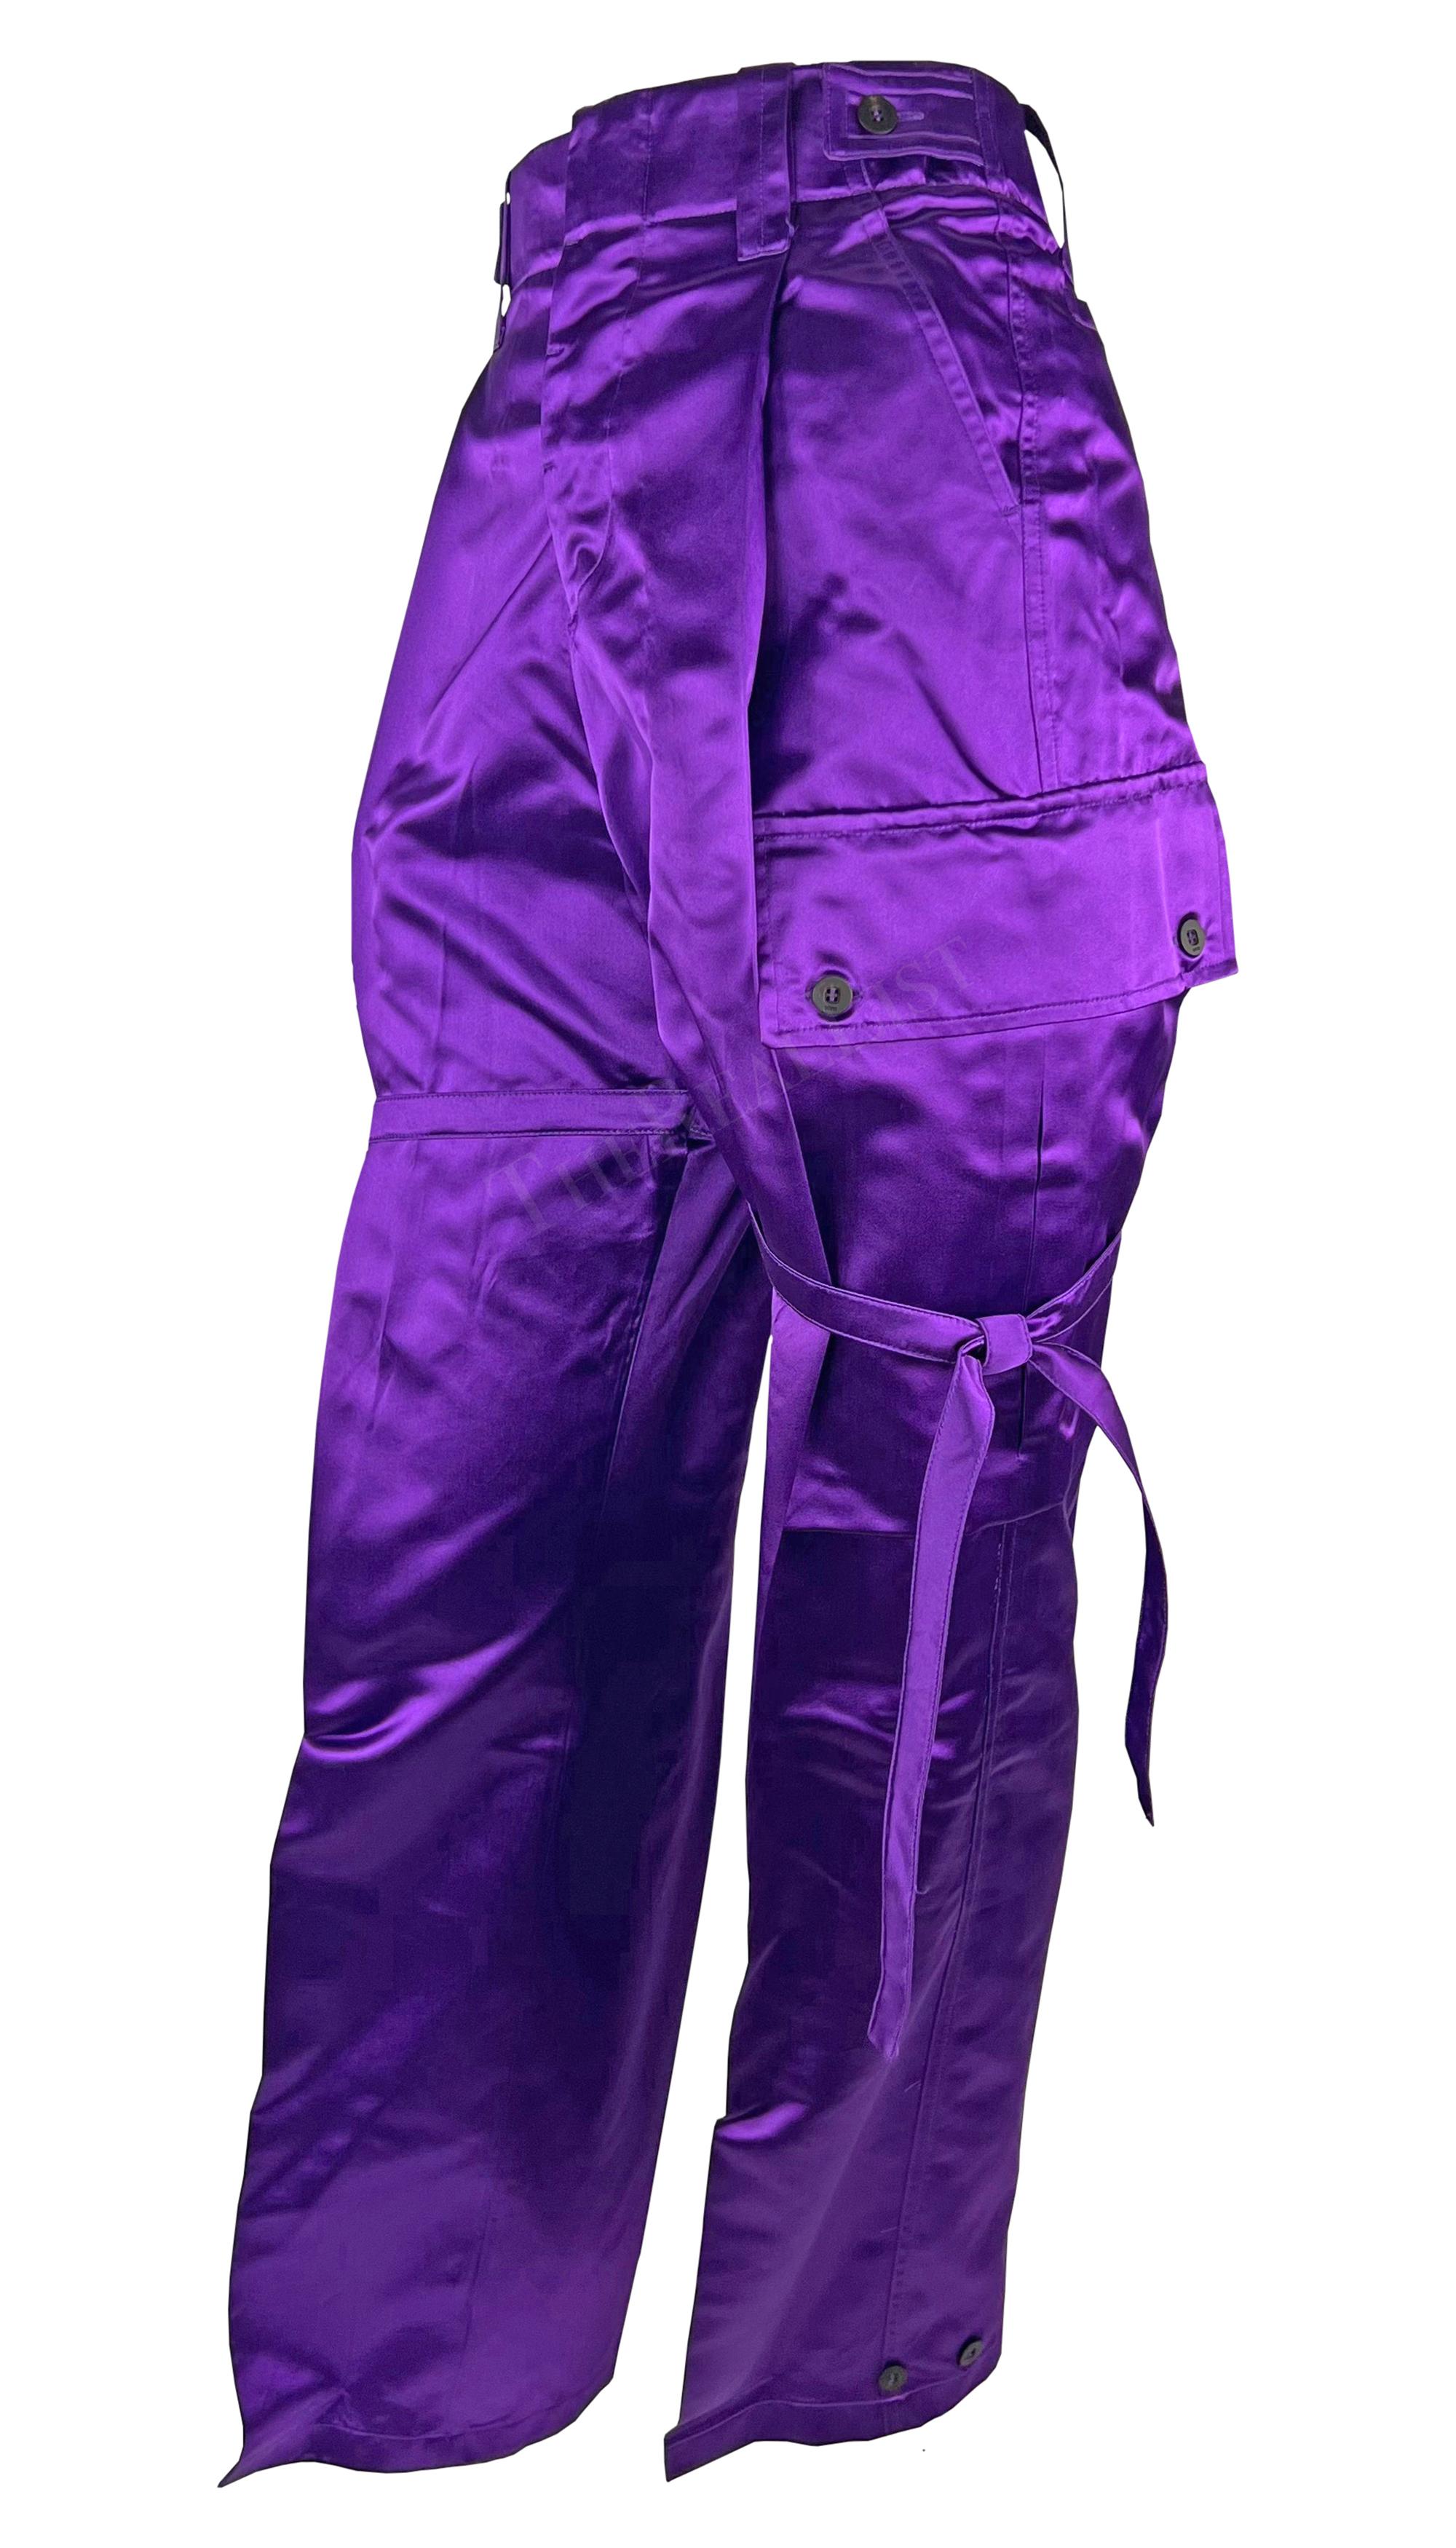 NWT S/S 2001 Gucci by Tom Ford Runway Purple Satin Tie Wide Leg Cargo Pants  In Excellent Condition For Sale In West Hollywood, CA